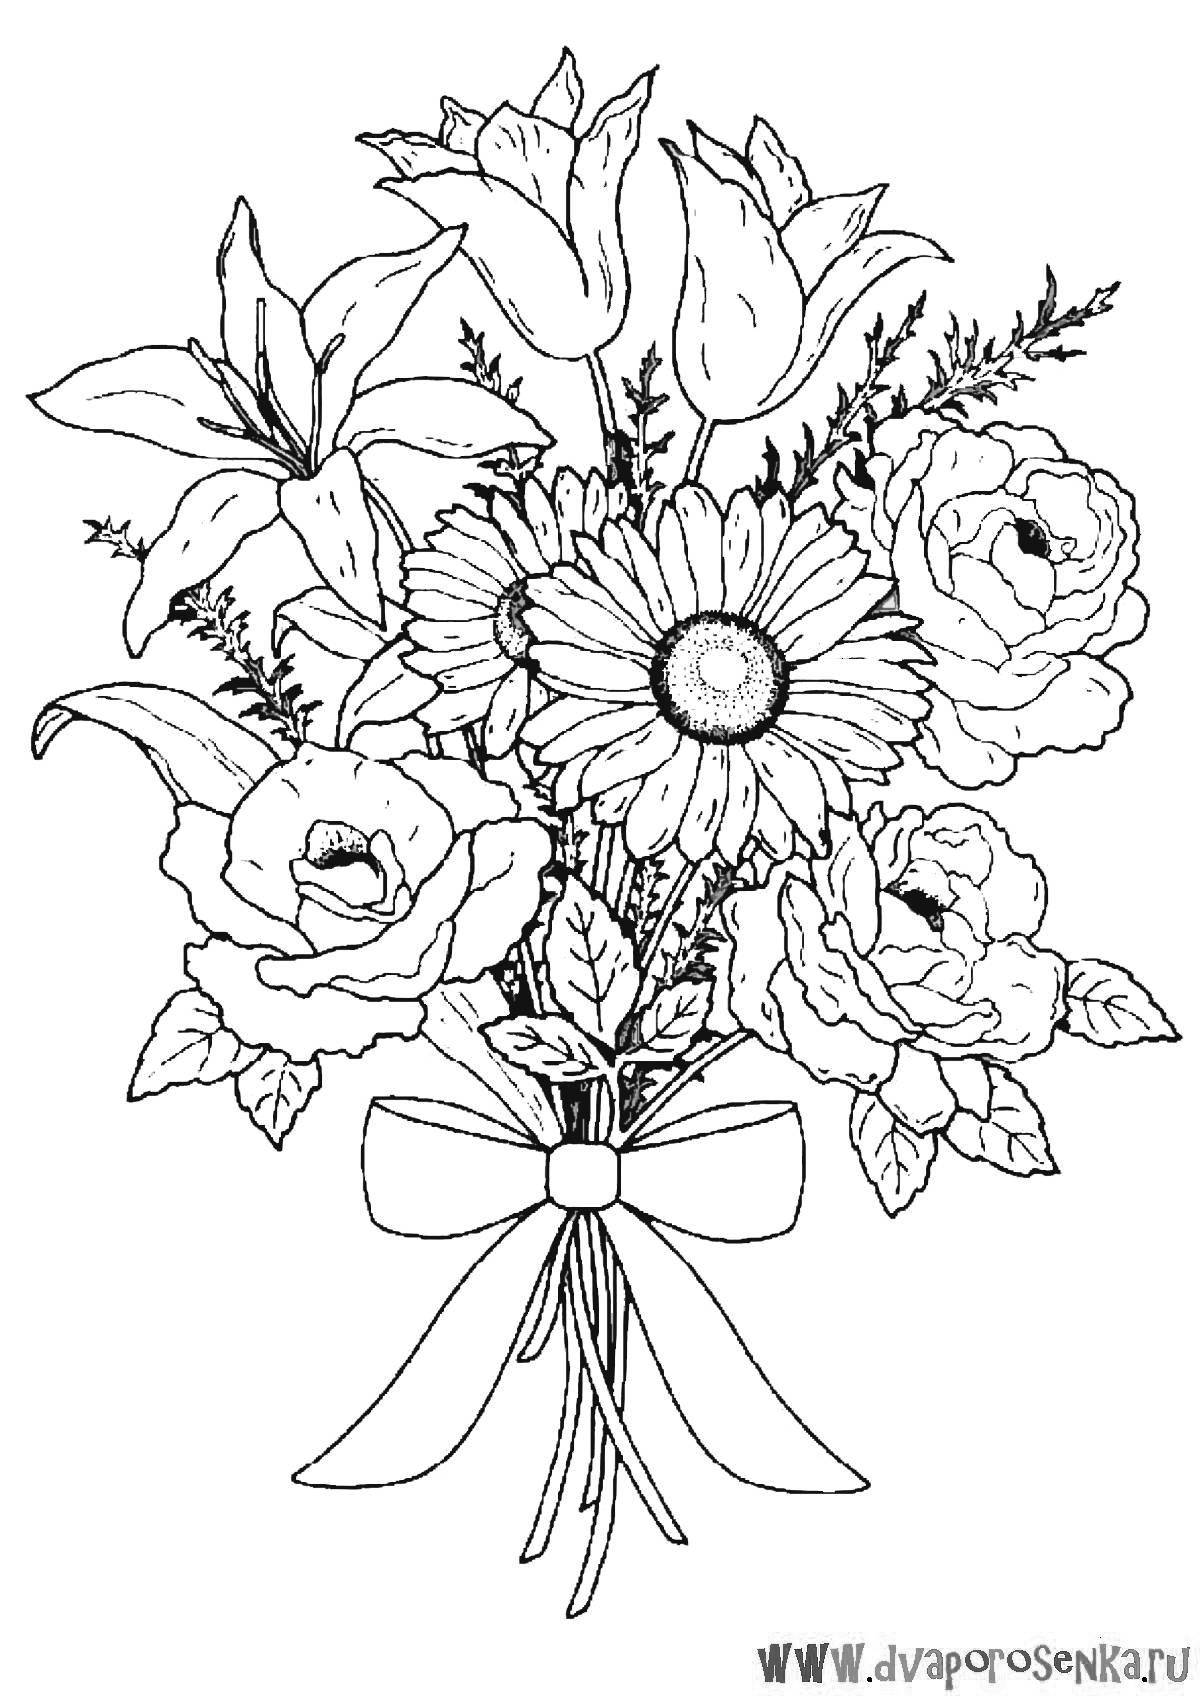 Coloring harmonious bouquet for mom